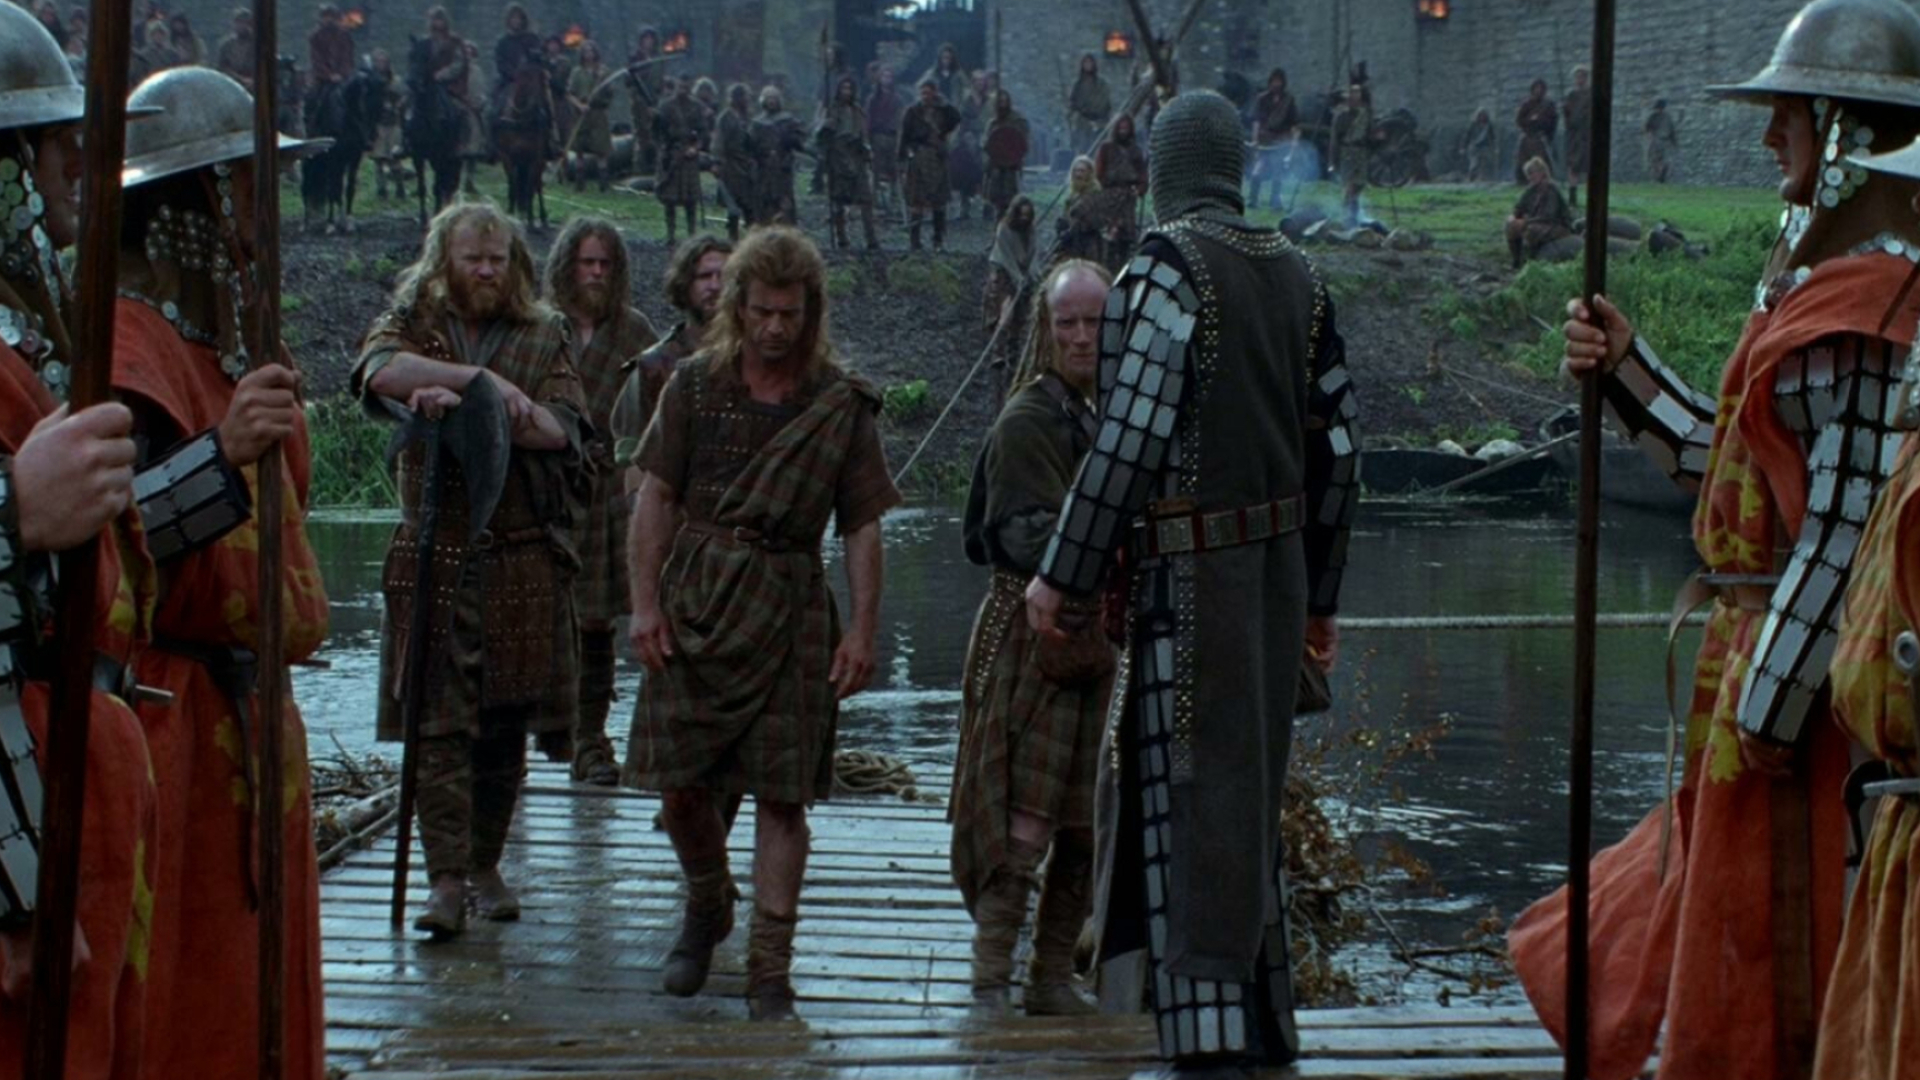 Braveheart: The movie was a winner of the Academy Award for best picture in 1995. 1920x1080 Full HD Wallpaper.